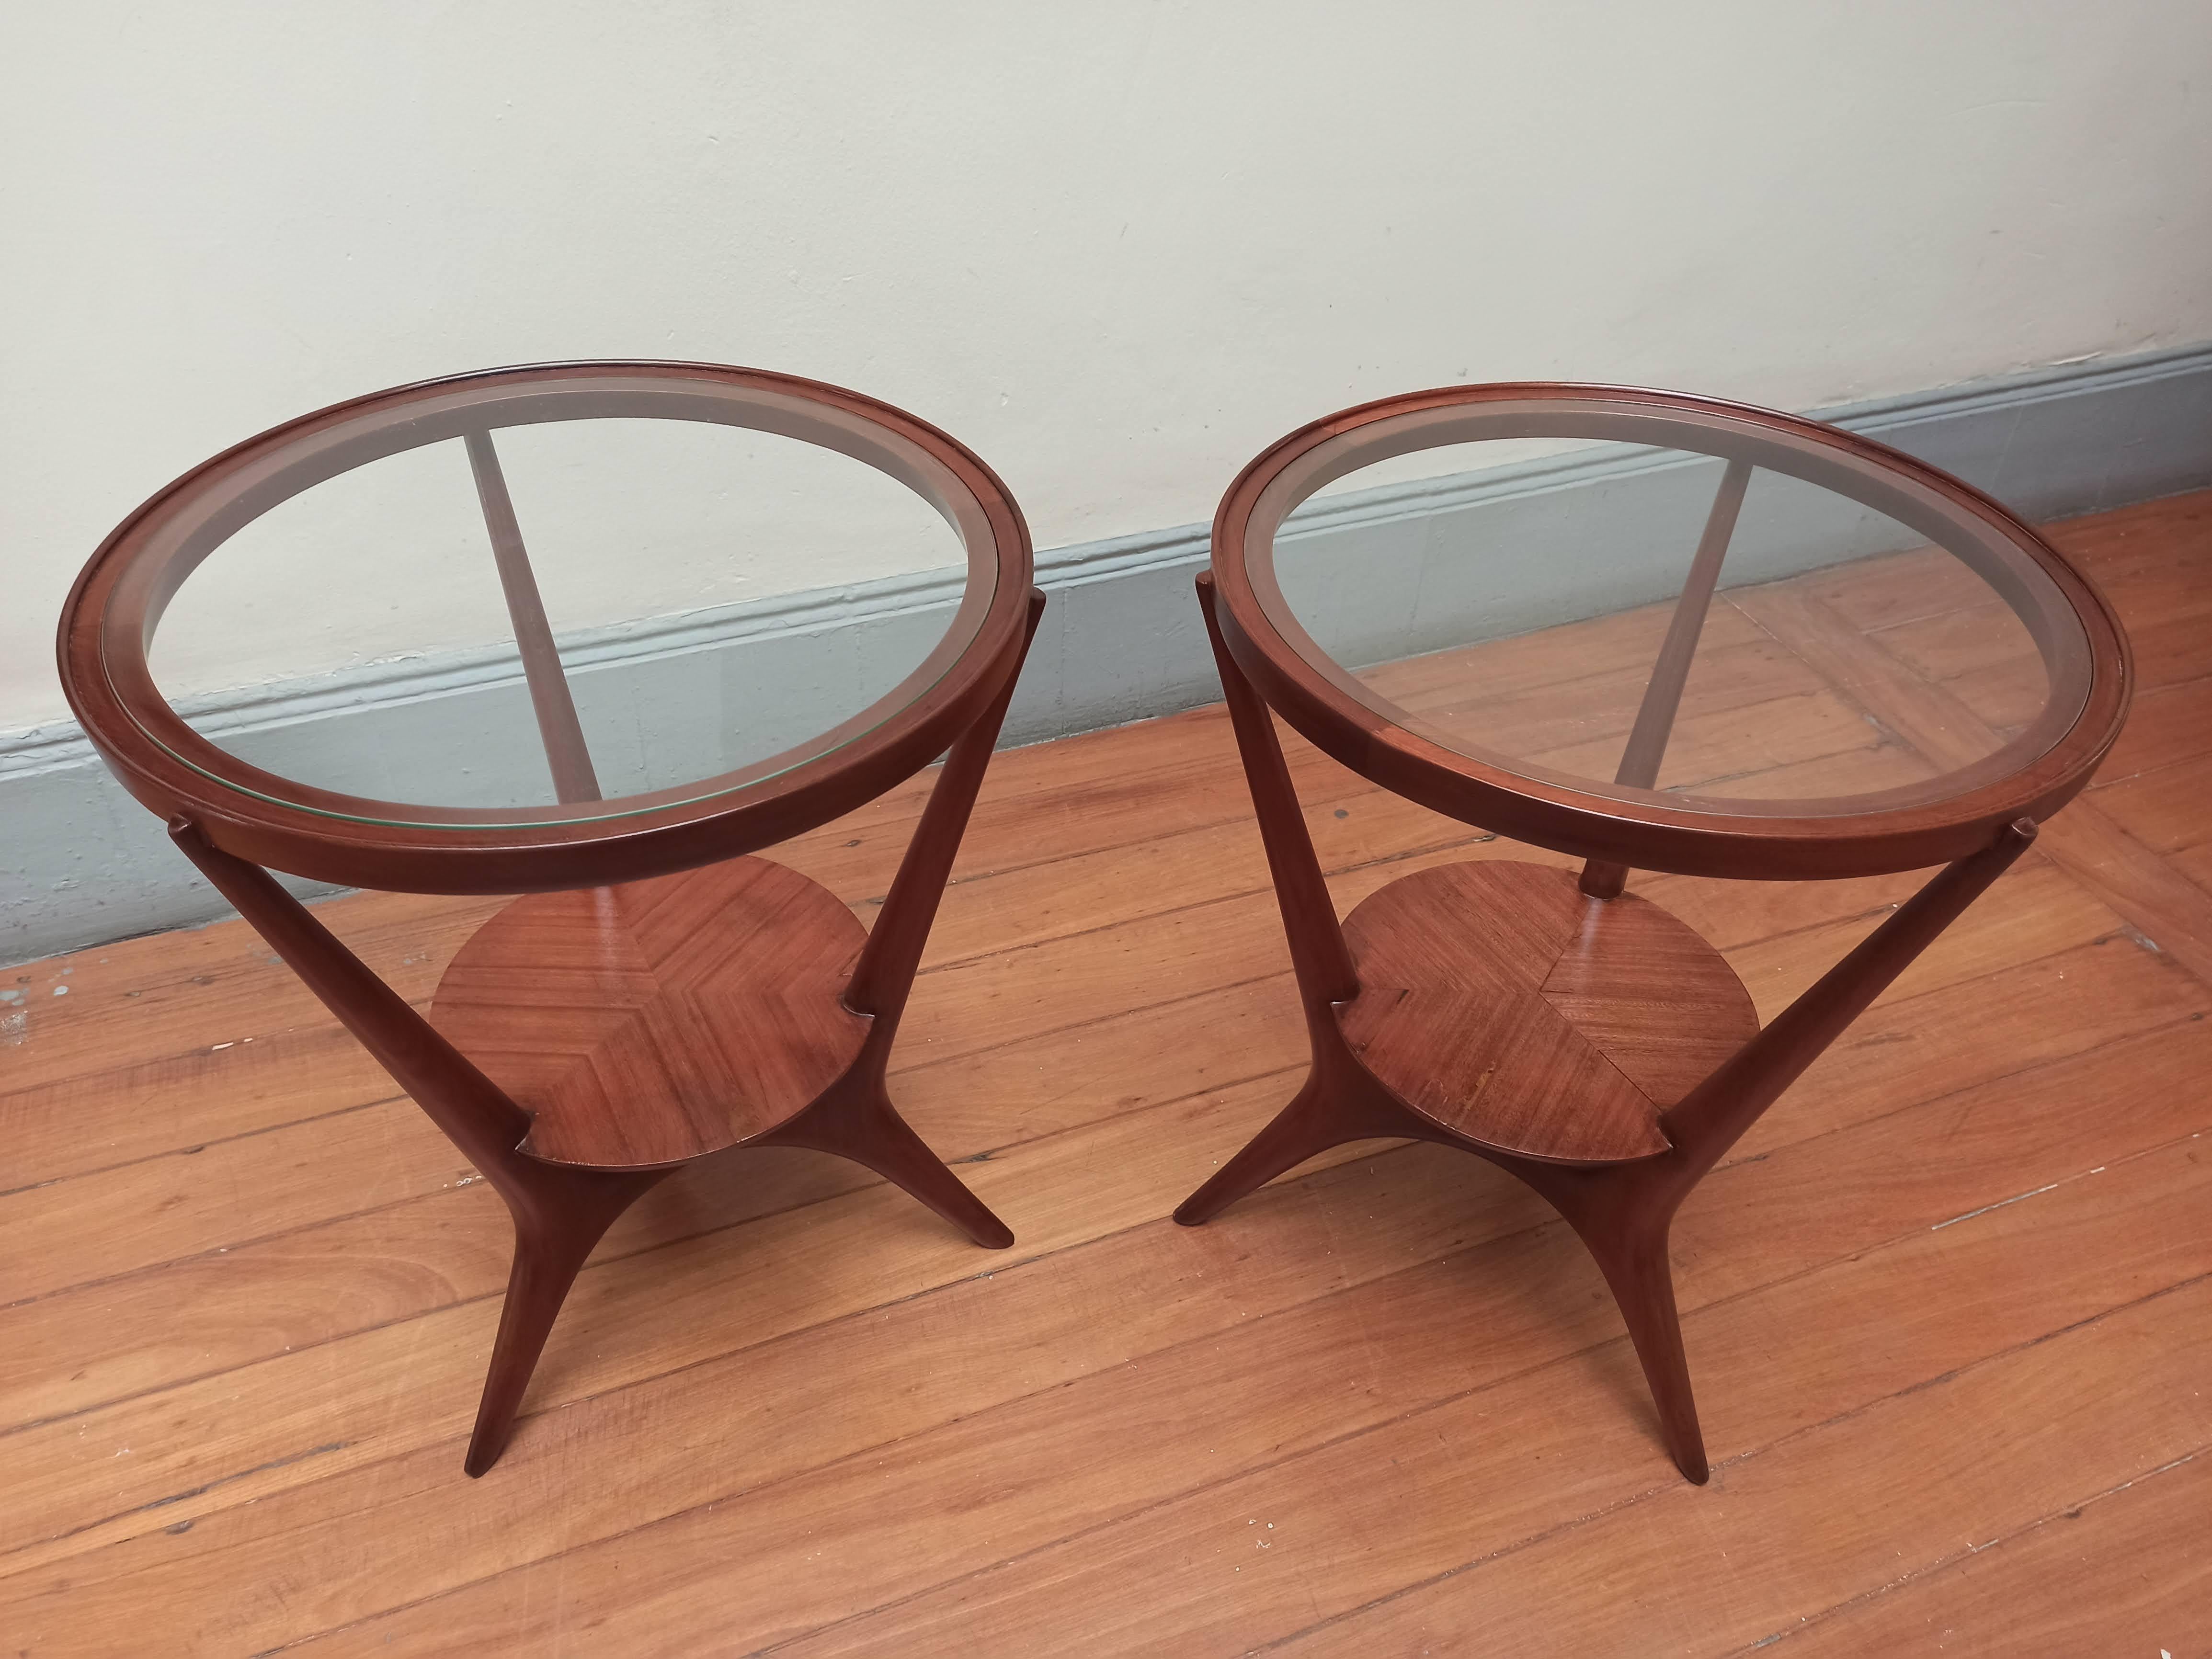 Mid-Century Modern Pair of Side Tables by Giuseppe Scapinelli, Brazil 1960s

Pair of two-story side tables by Giuseppe Scapinelli manufactured in the 60's in Brazil.
Structured in wood with a nested glass top, this piece features the designer's